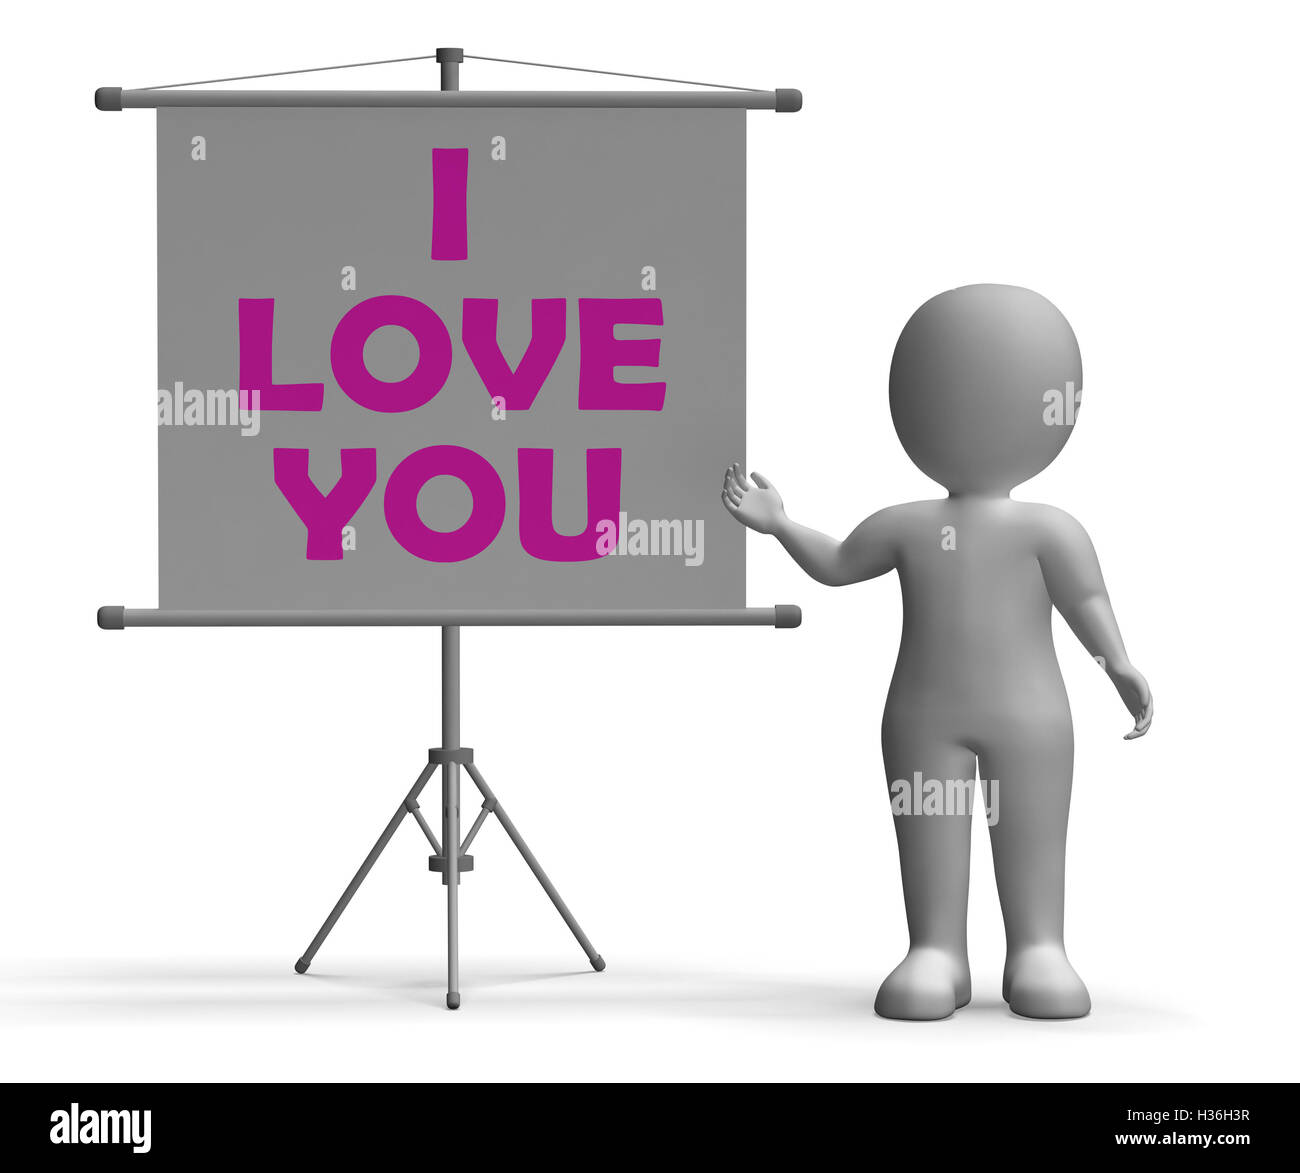 I Love You Board Means Romance And Dating Stock Photo